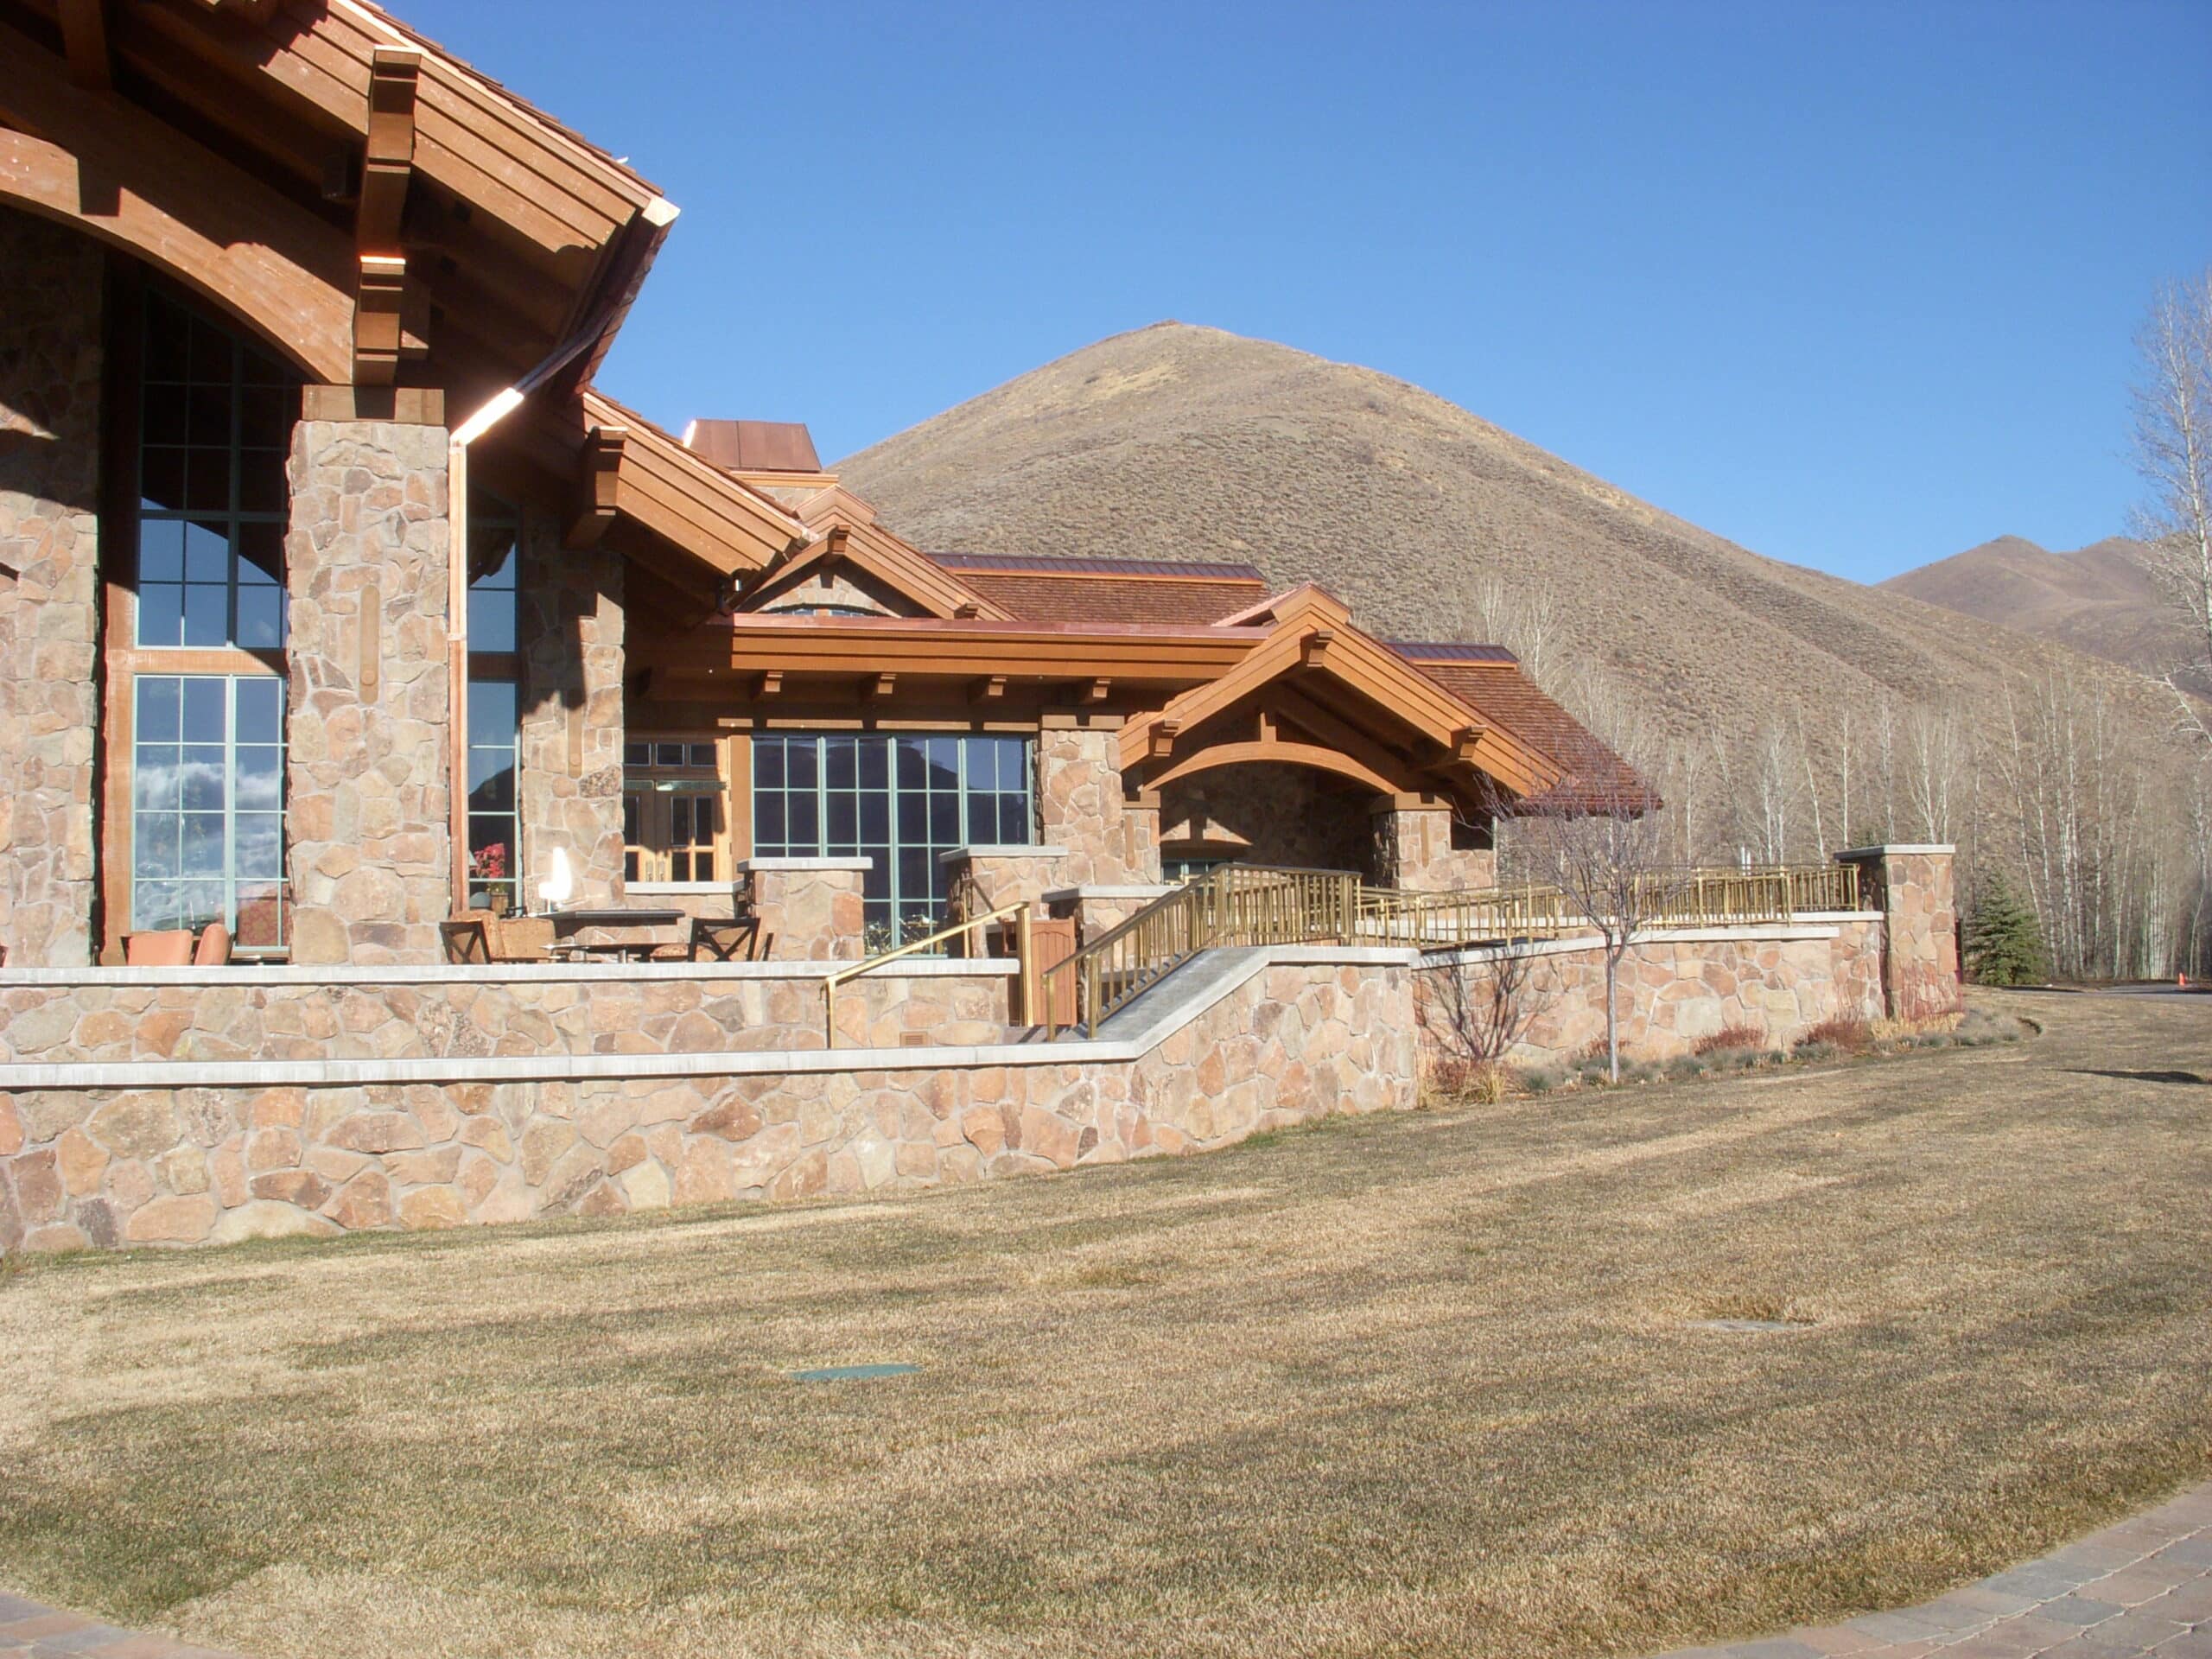 Glued laminated timber Curved Beams, Trusses and Columns manufactured by QB Corporation for The Sun Valley Lodge